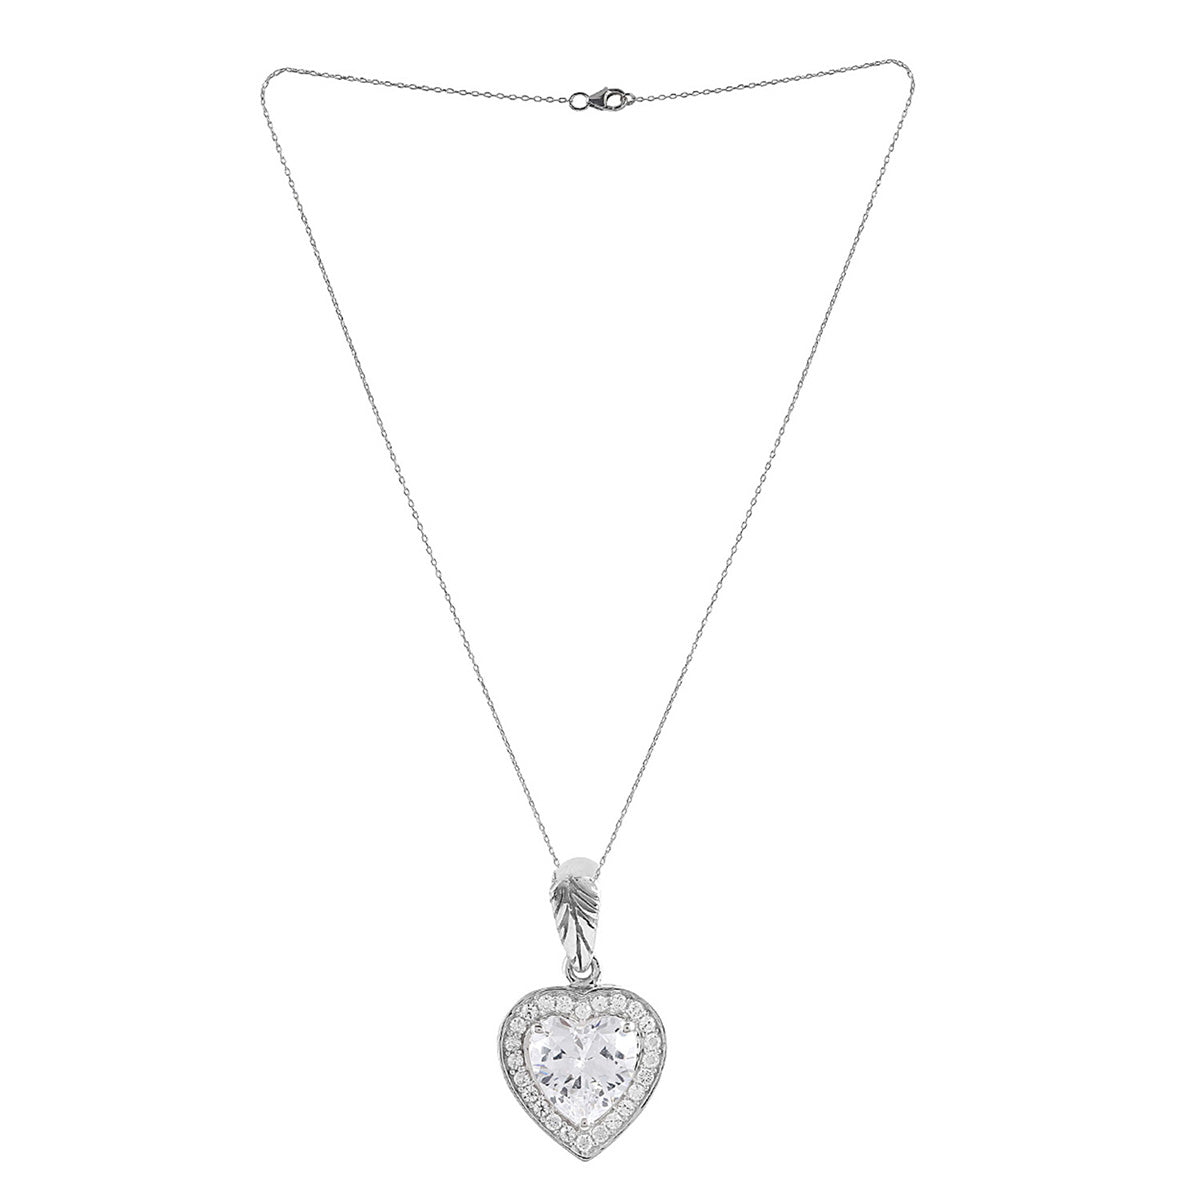 Amazon.com: PicturesOnGold.com 14K Gold Filled Floral Heart Photo Locket  with Diamond - 3/4 inch x 3/4 inch - Includes 18 inch Chain (Locket + 1  Photo): Clothing, Shoes & Jewelry